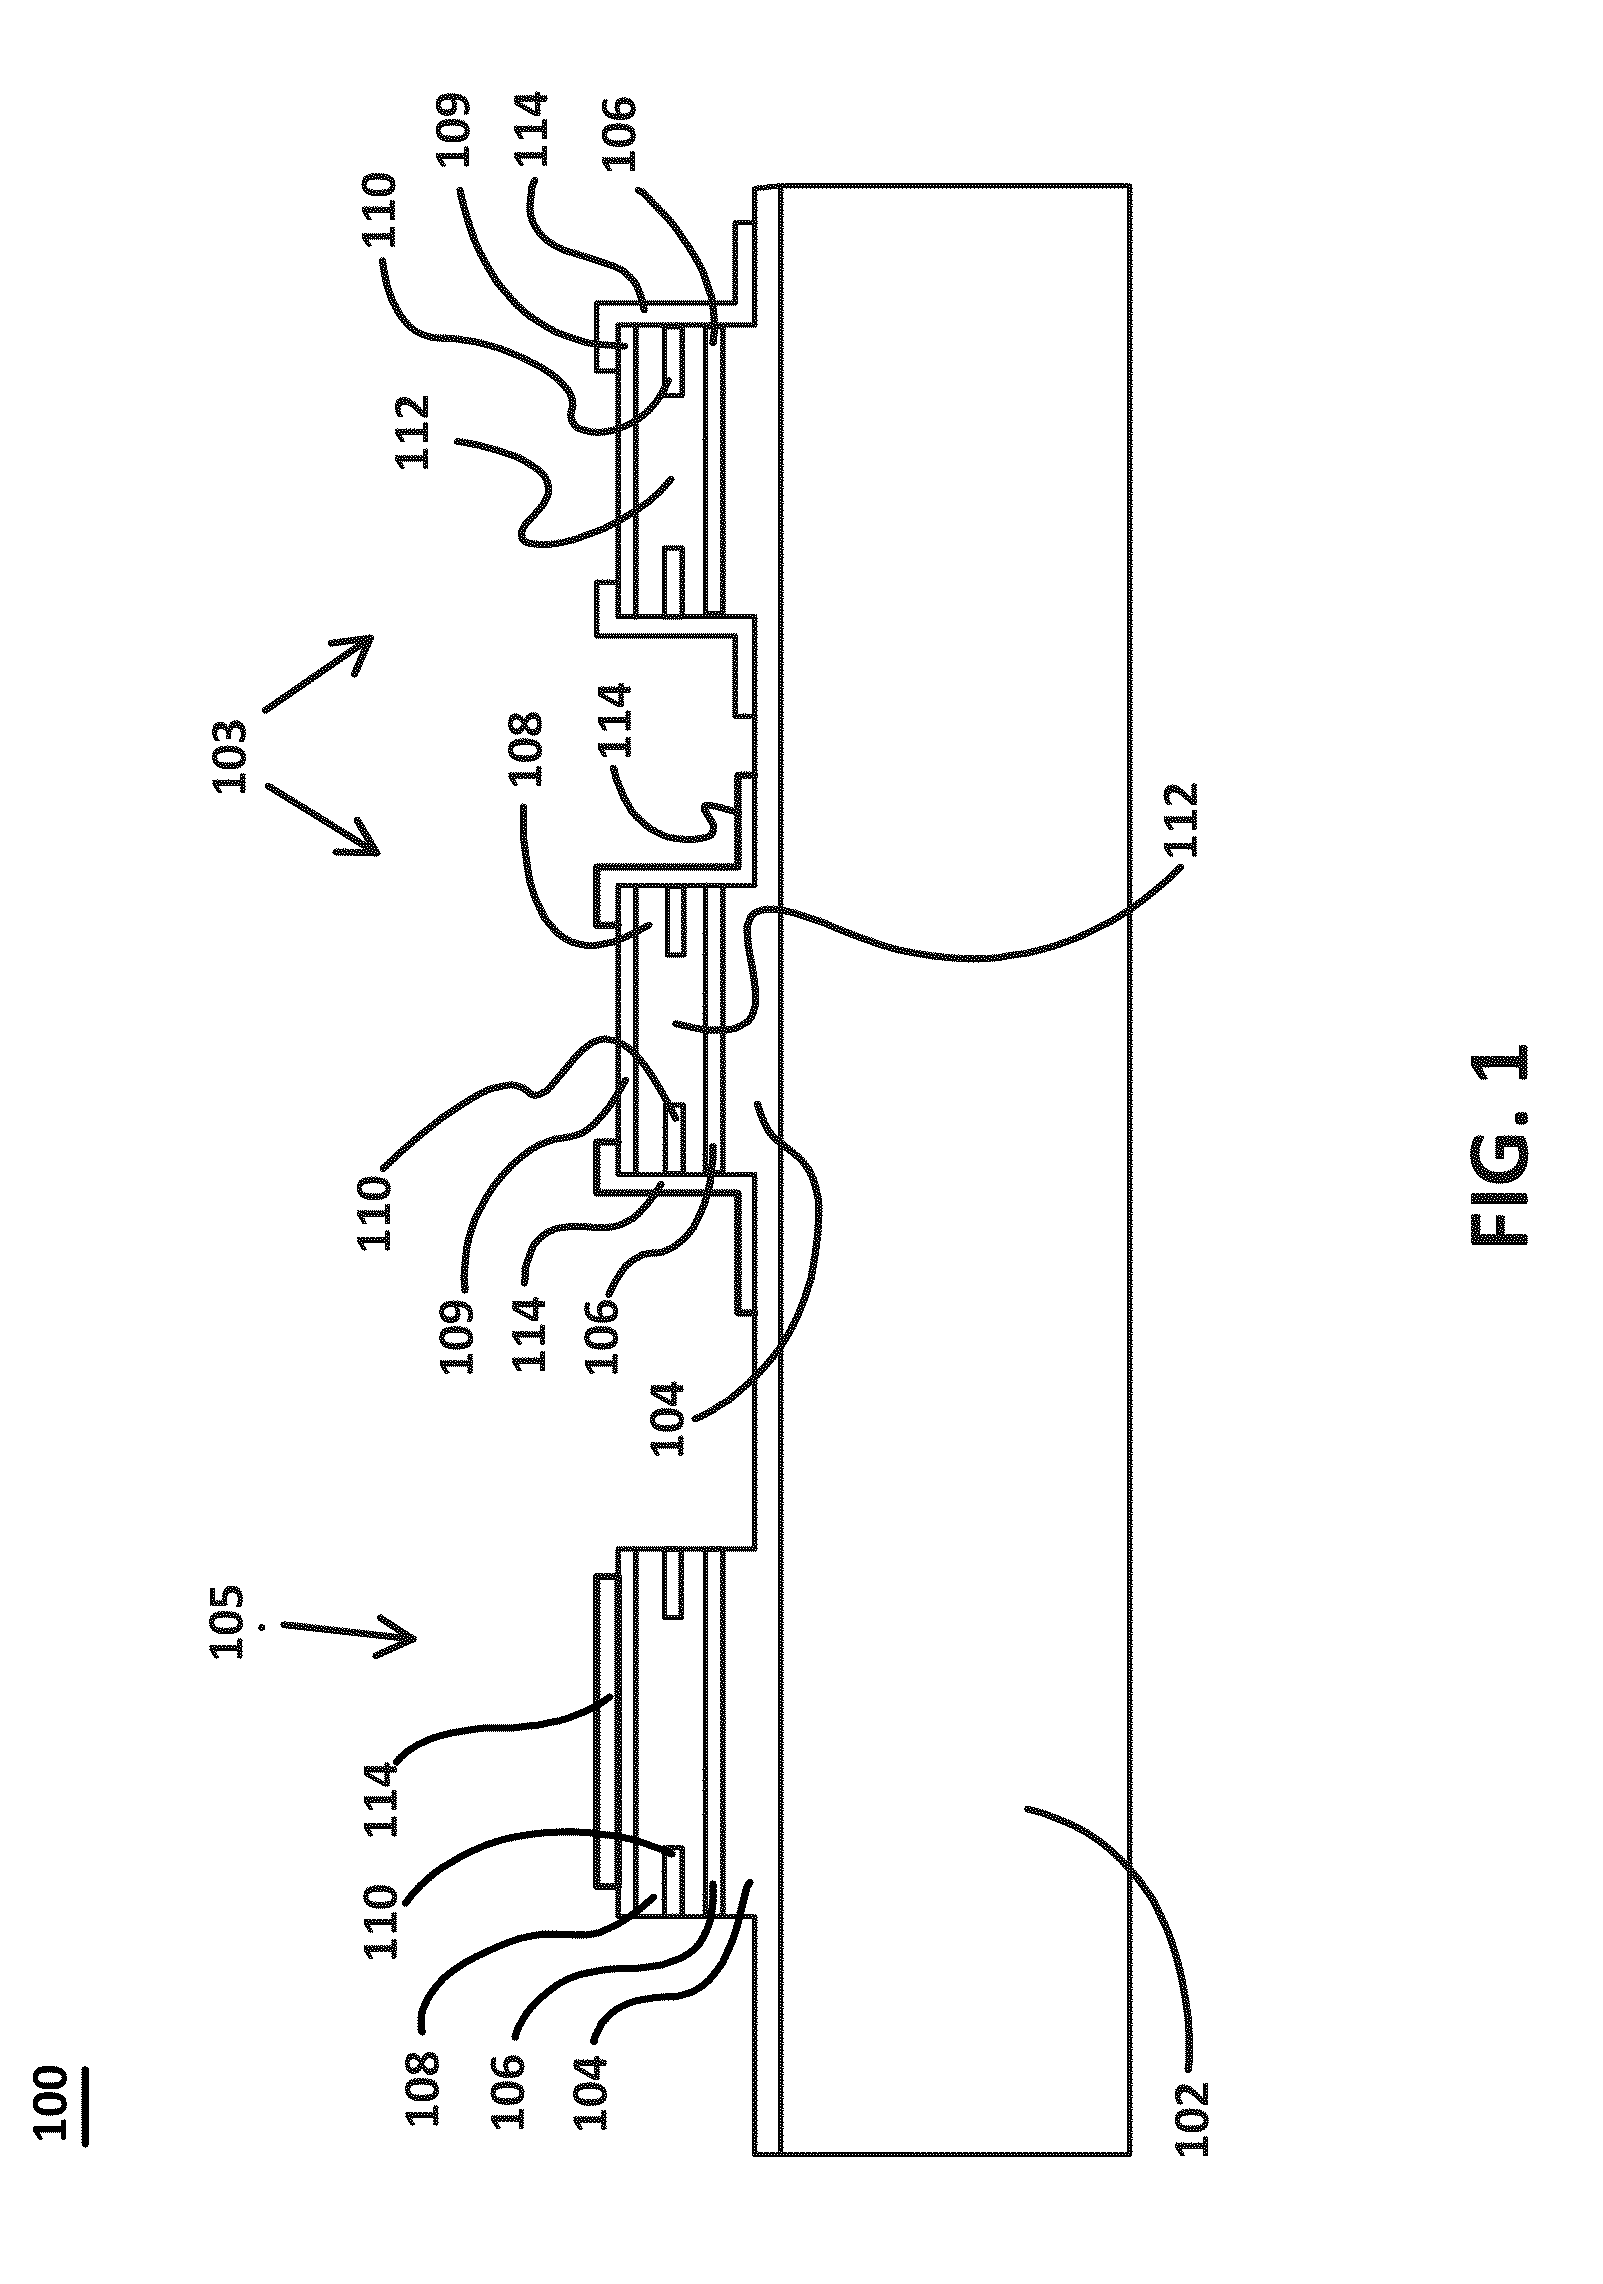 Multibeam arrays of optoelectronic devices for high frequency operation